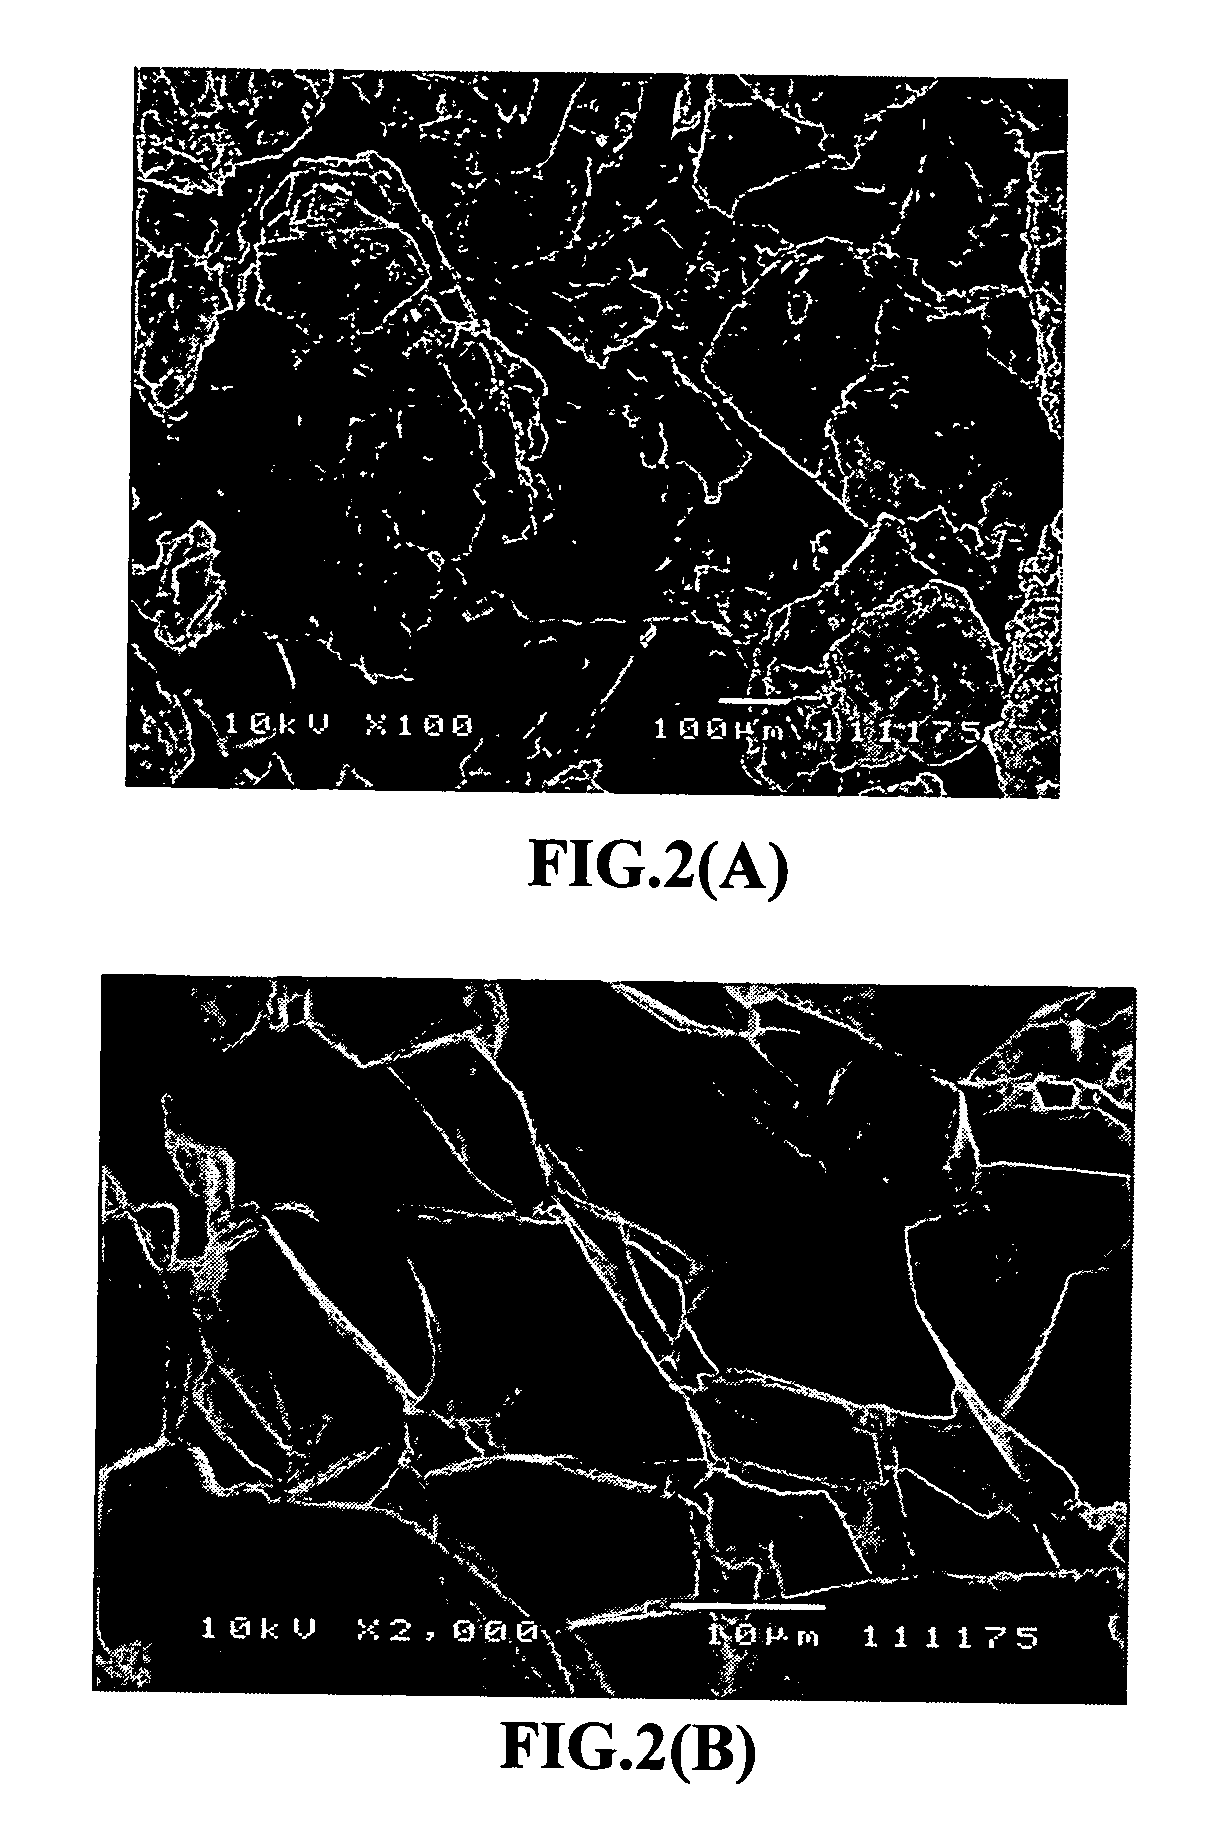 Process for producing nano-scaled graphene plates